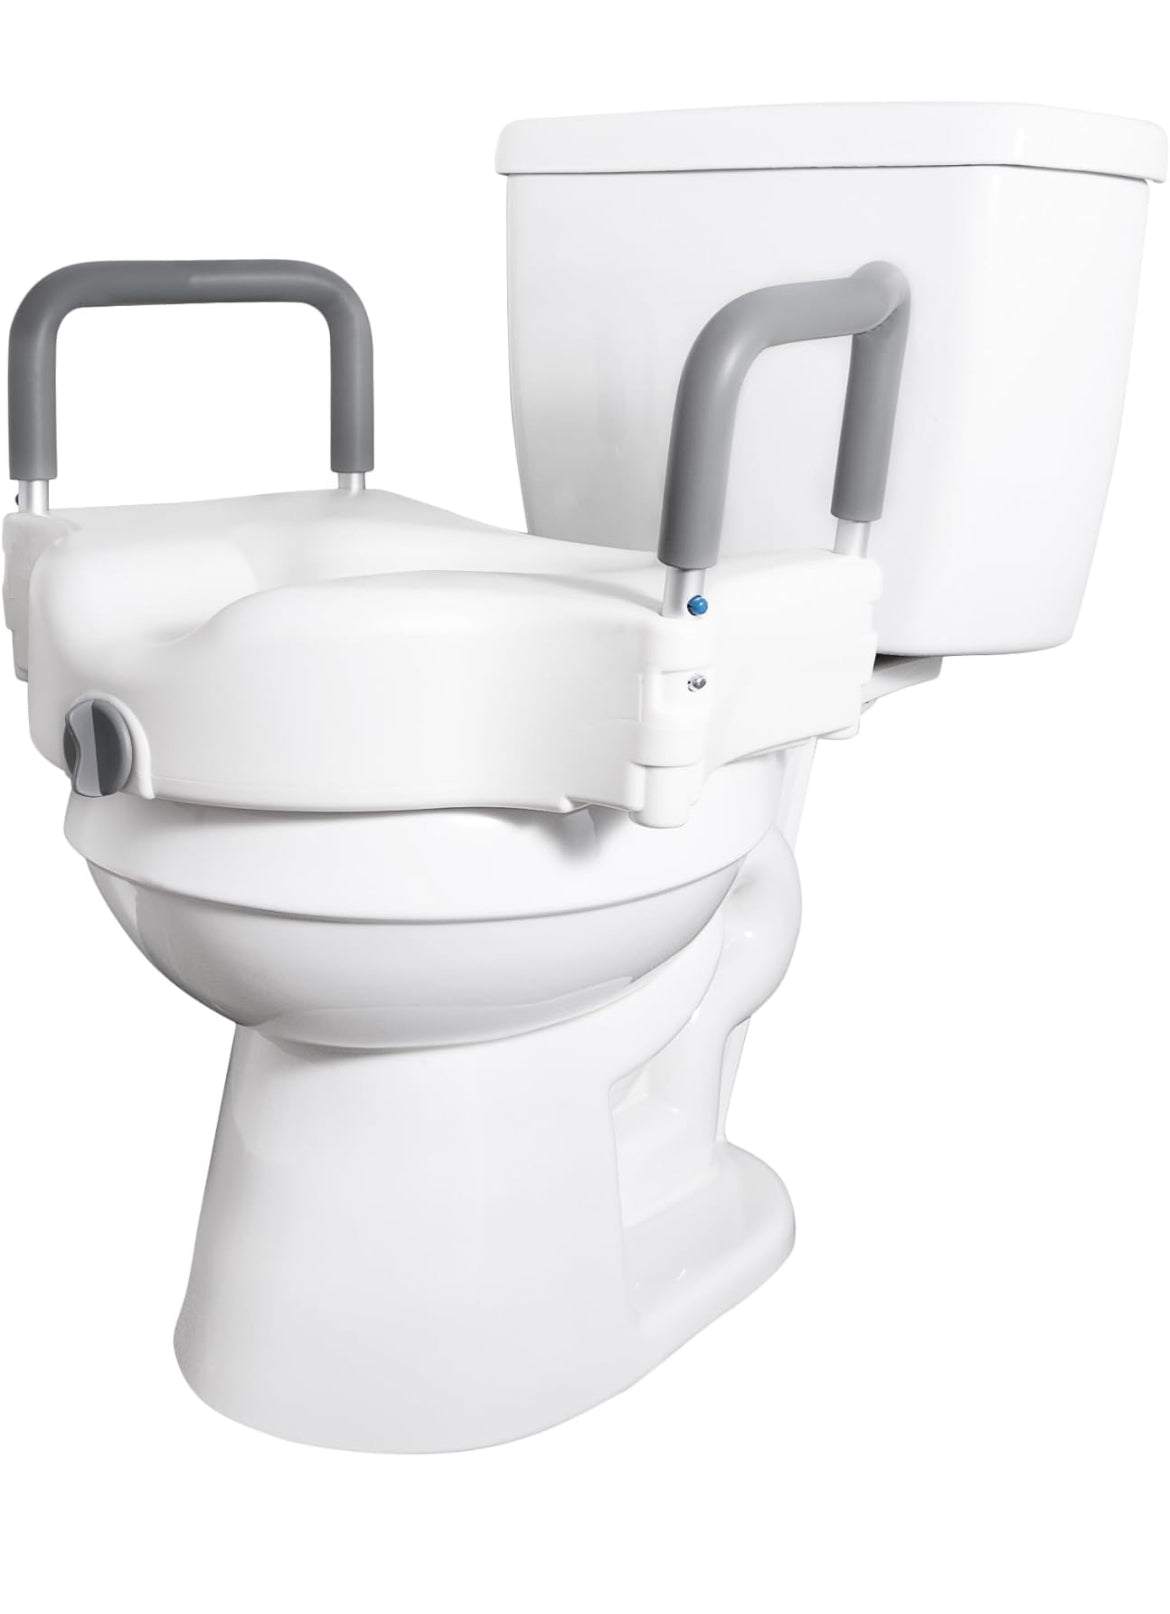 Vaunn Raised Toilet Seat and Elevated Commode Booster Seat Riser - Selzalot